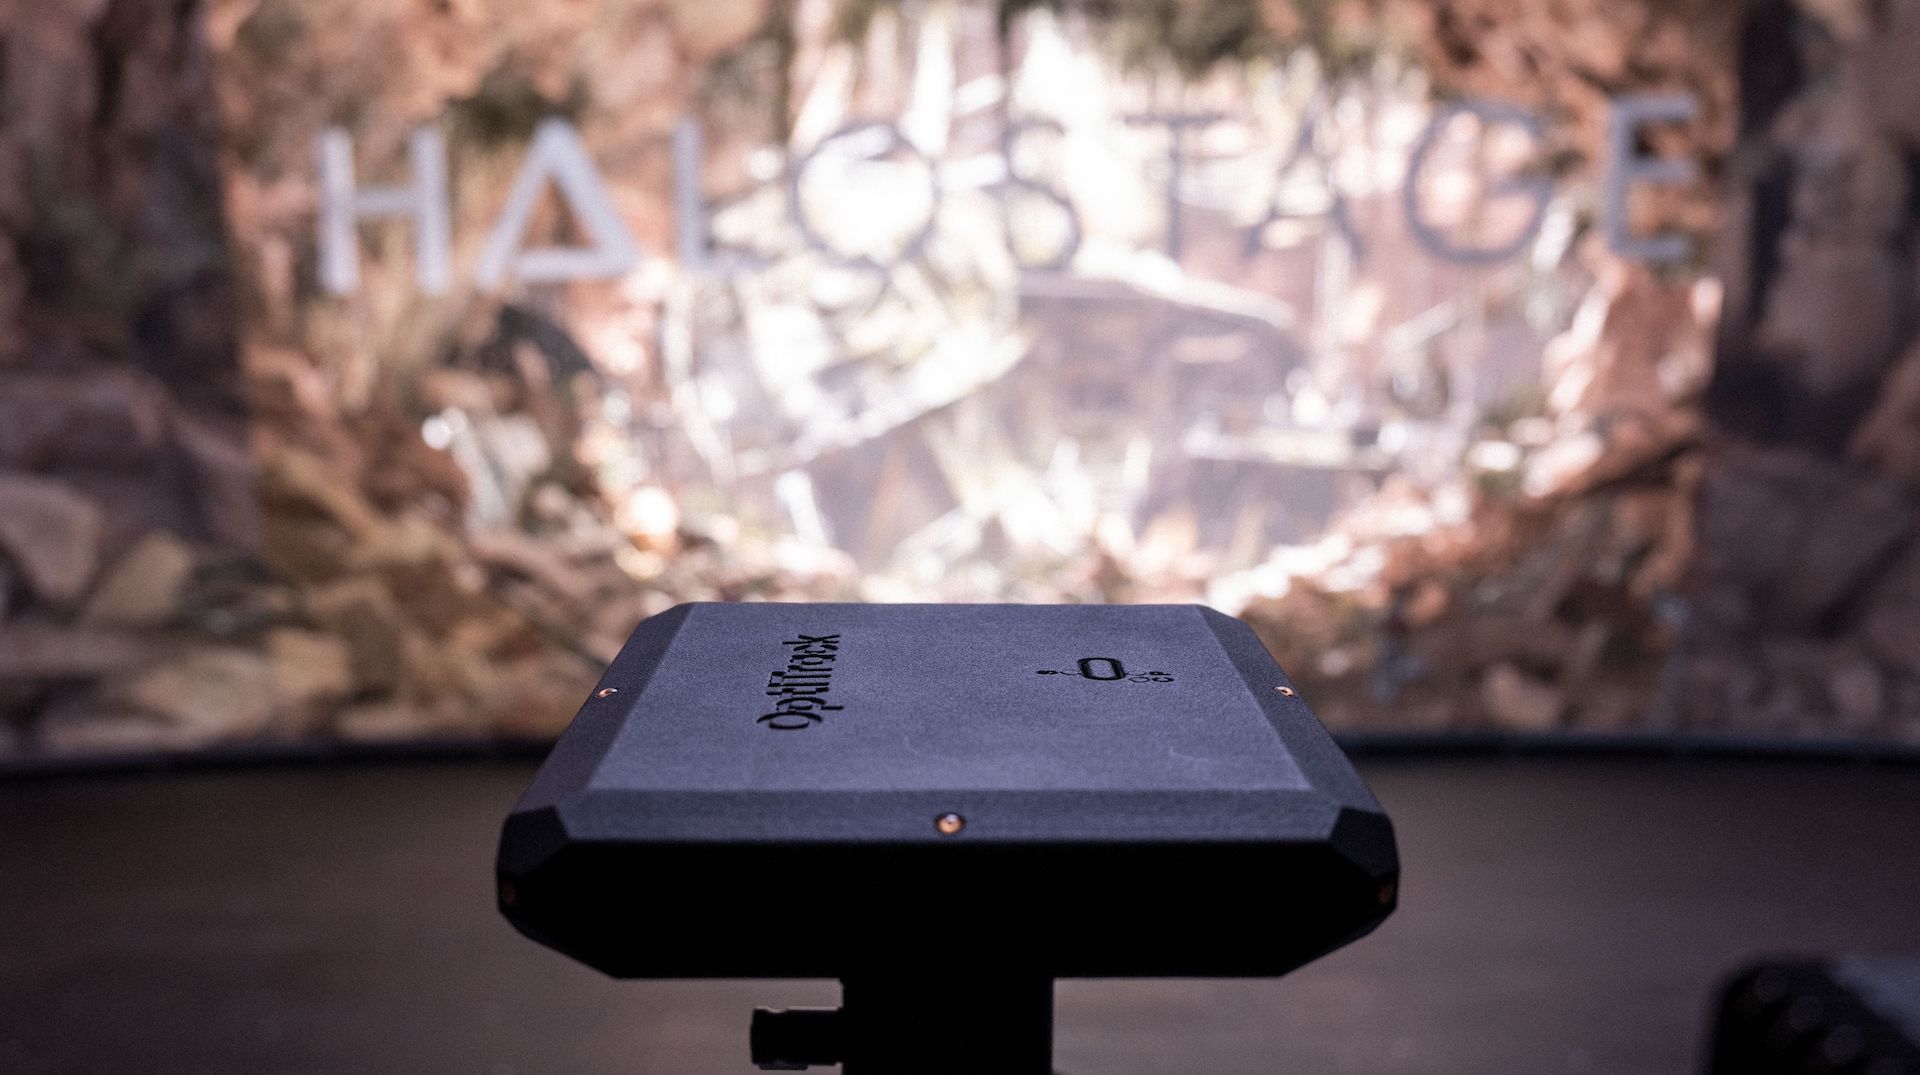 CinePuck's low profile means it doesn't get in the way even on tightly rigged sets. Pic: Halostage